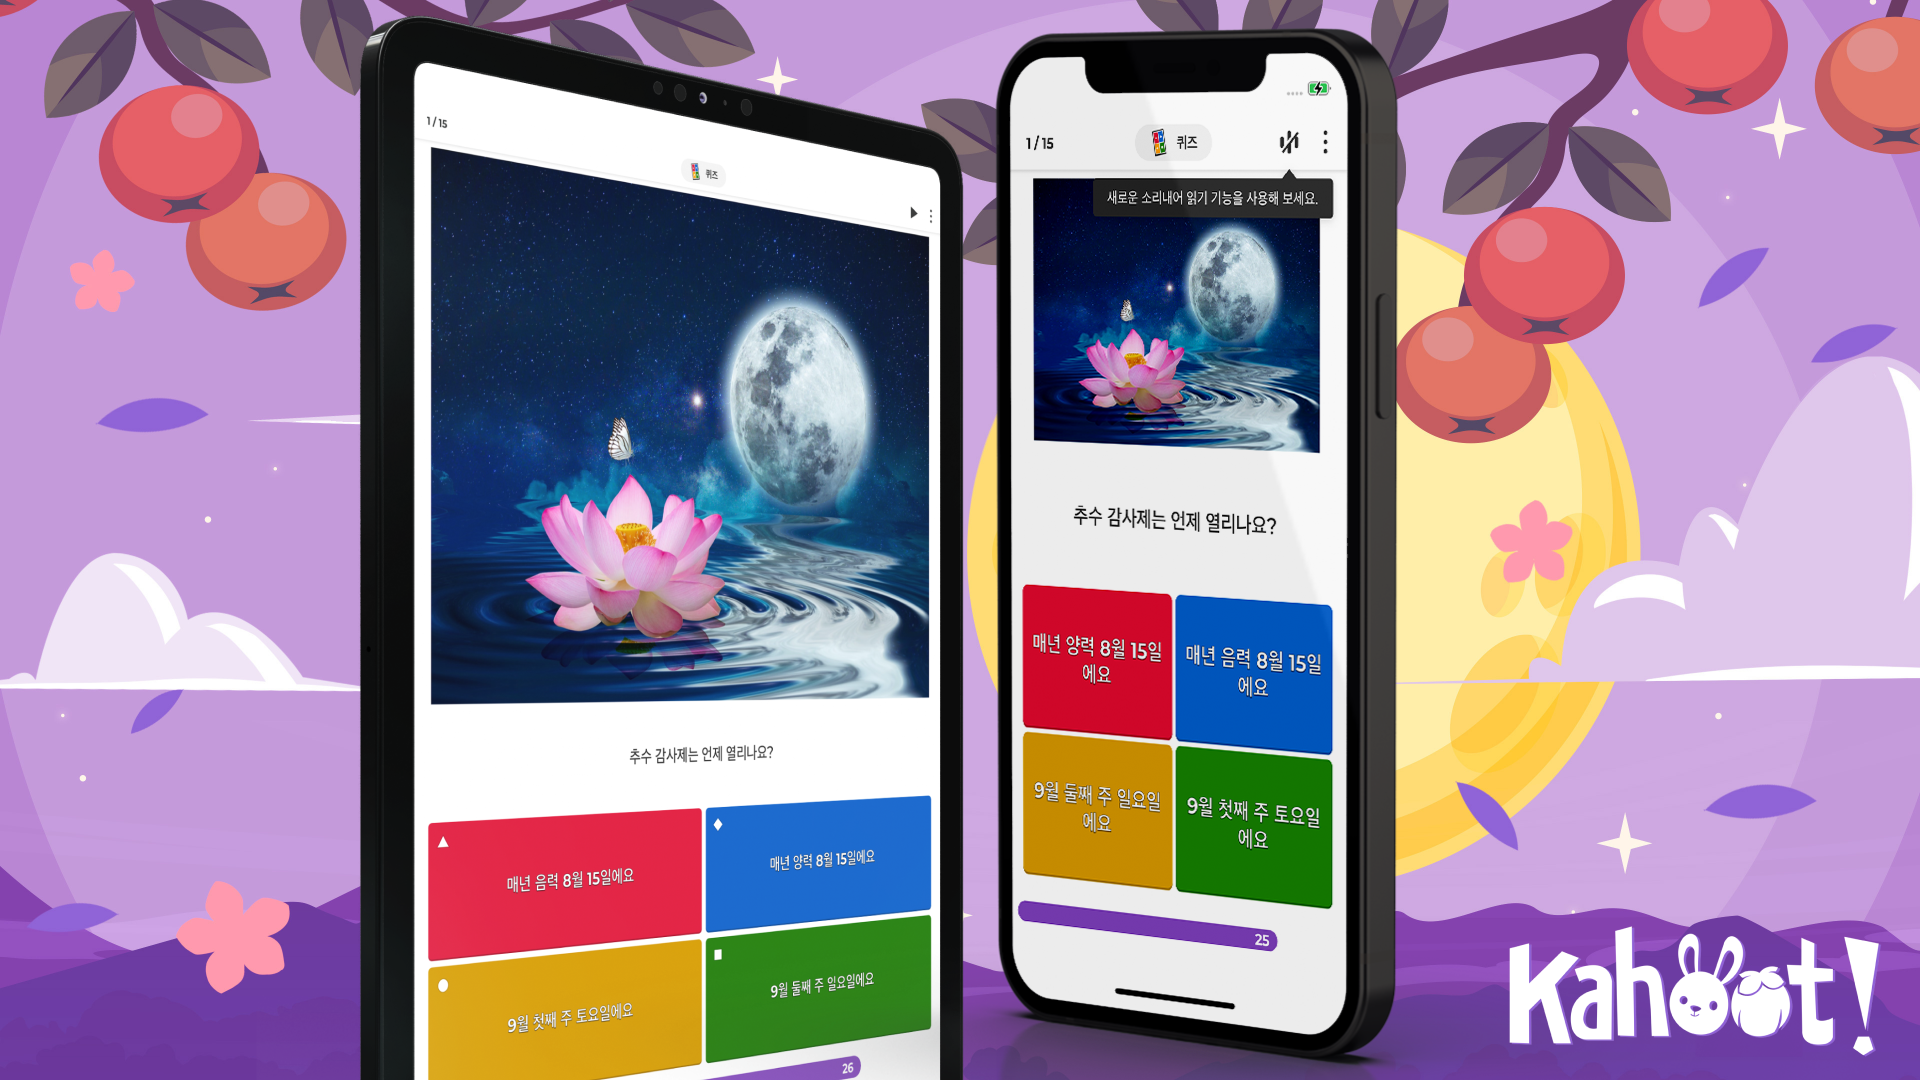 Celebrate the Harvest Moon Festival with Kahoot!